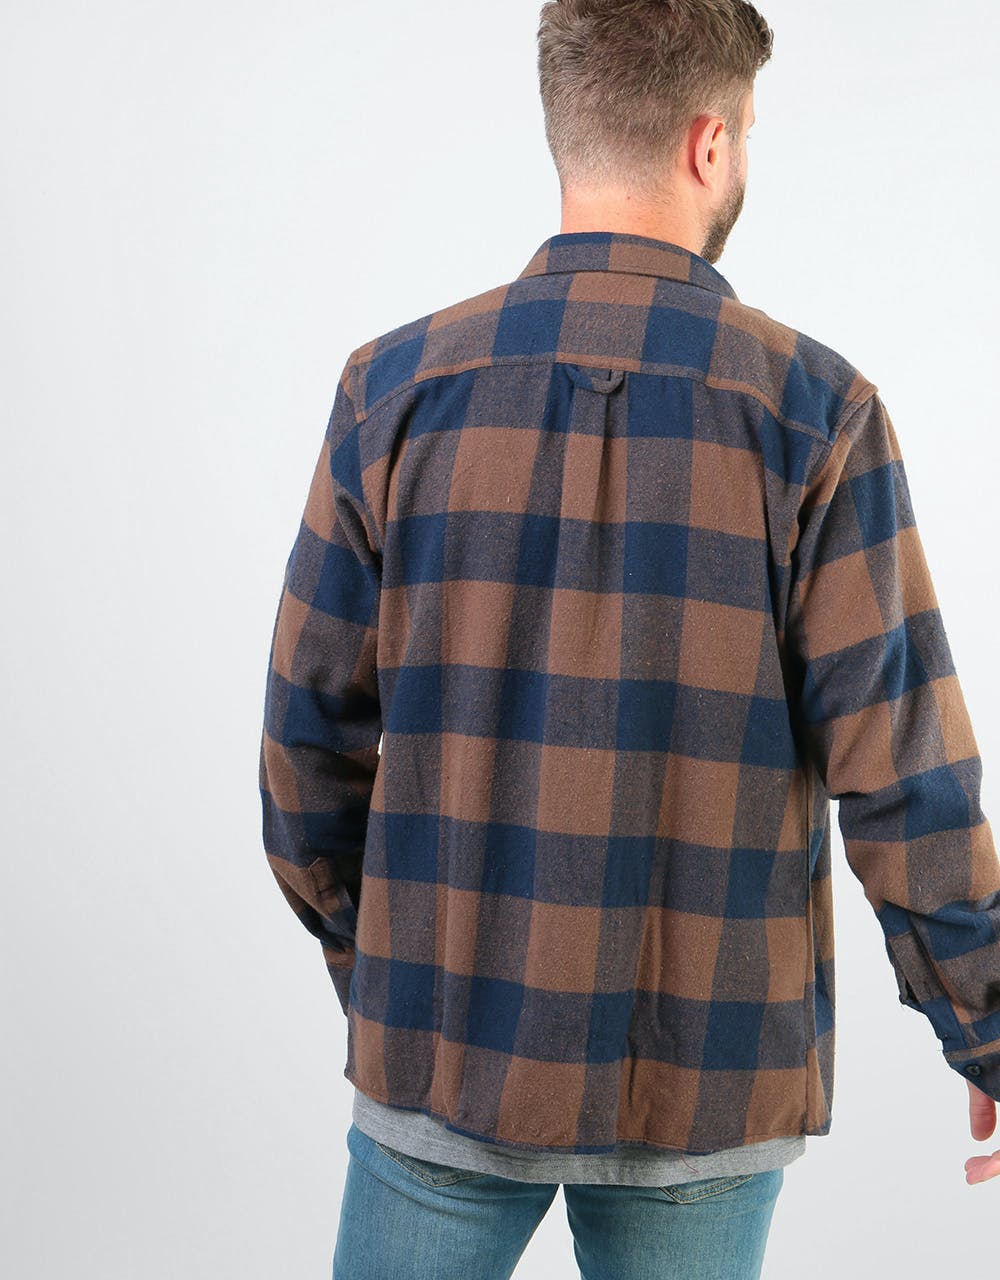 Route One Flannel Shirt - Brown/Navy